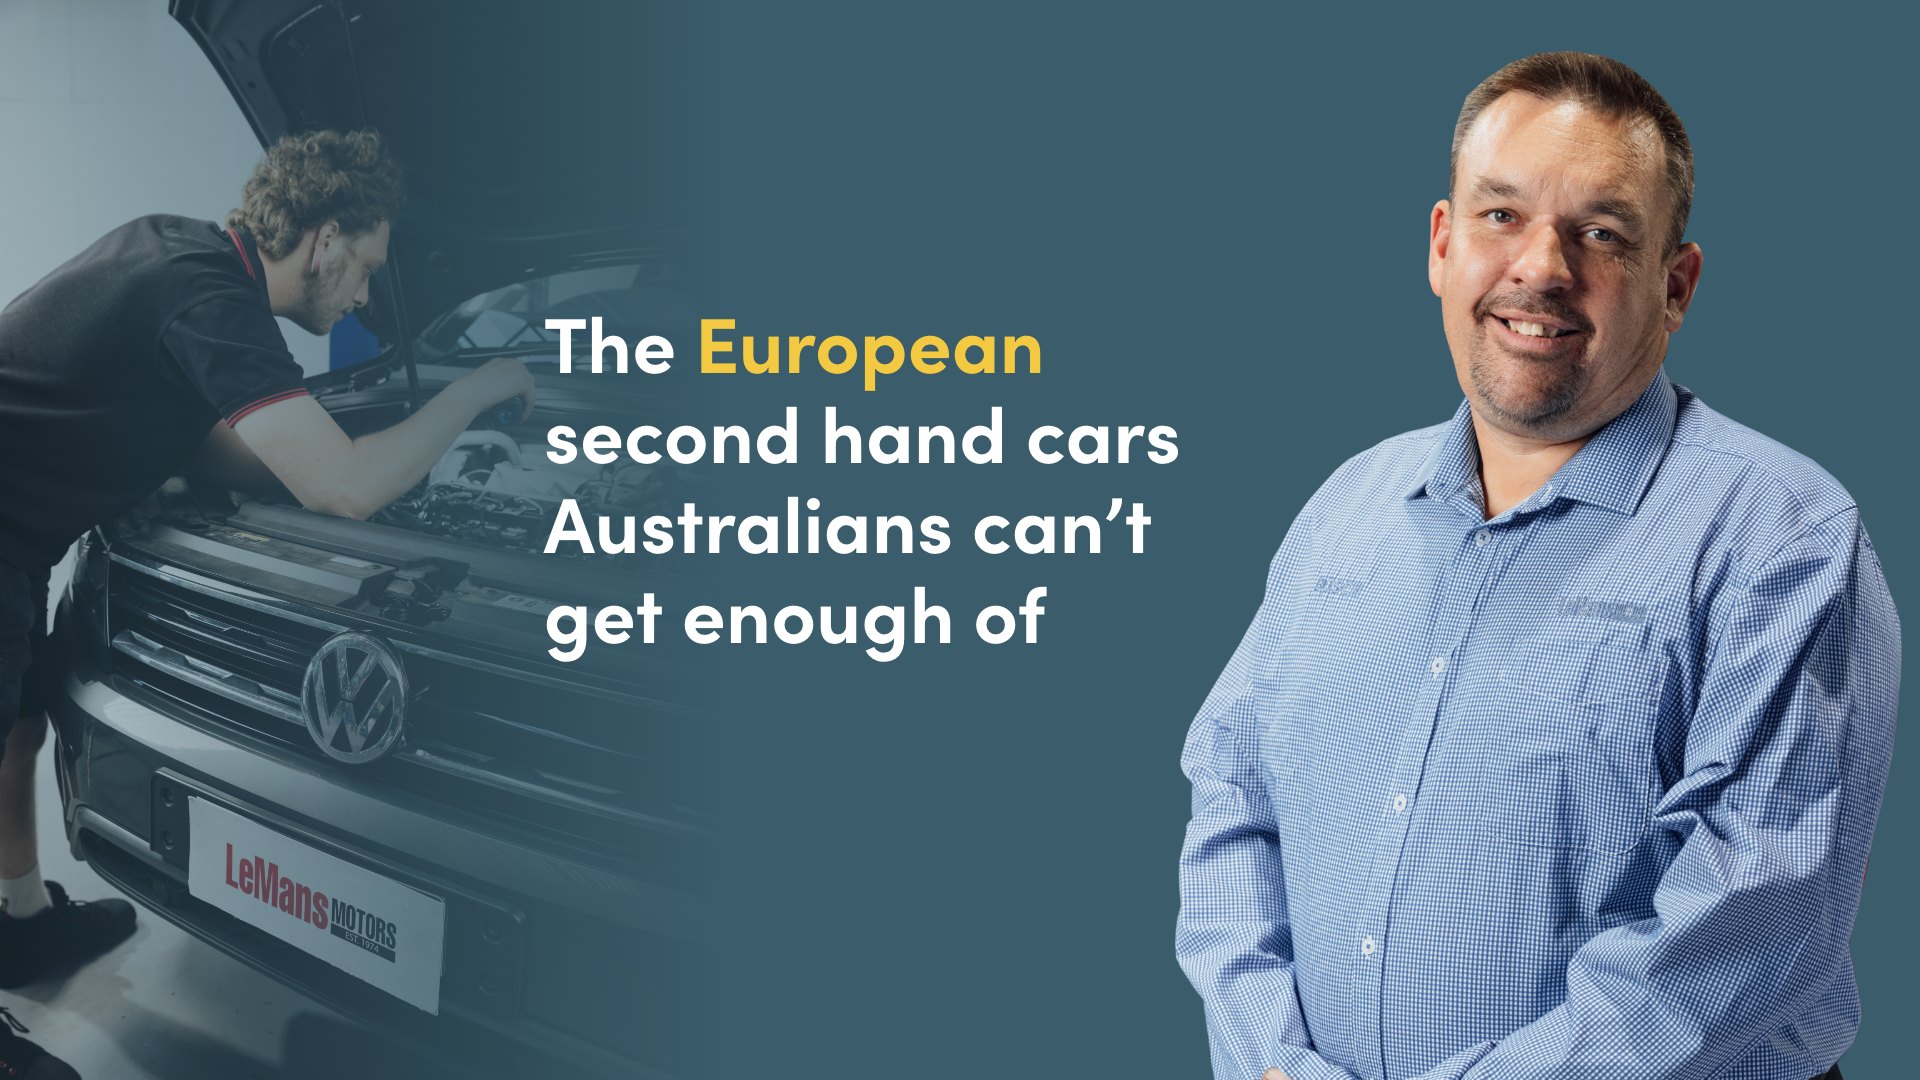 The European second hand cars Australians can’t get enough of